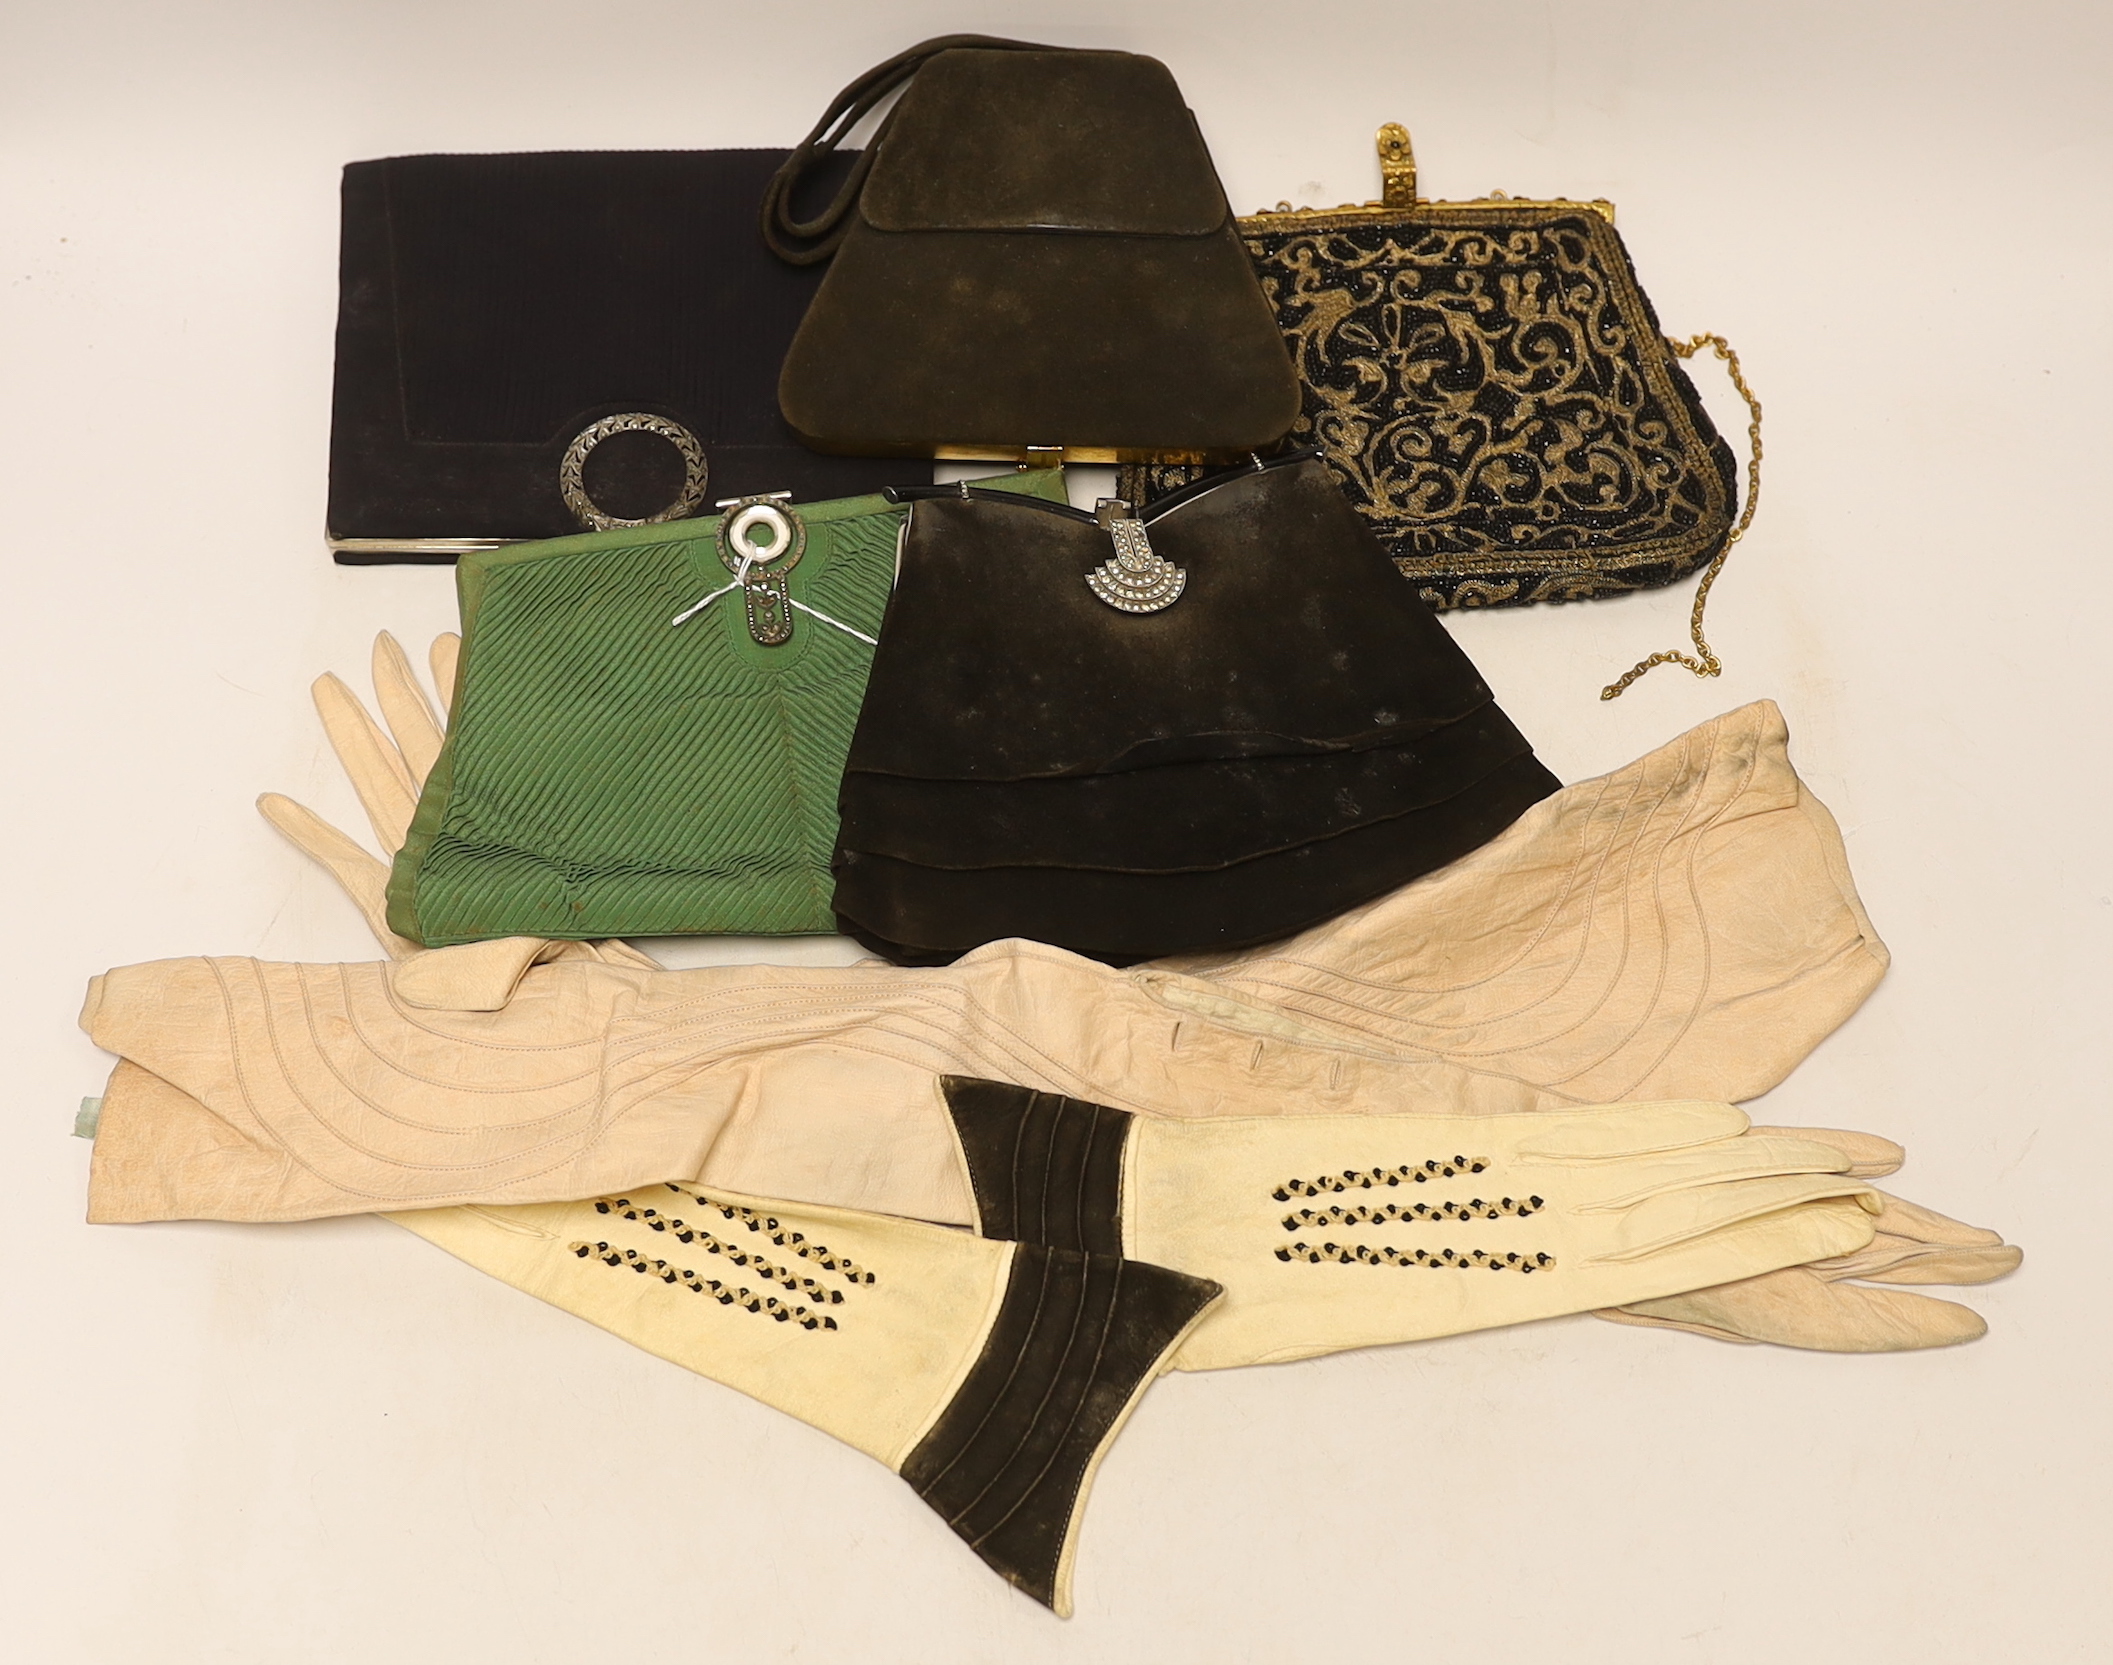 Five ladies evening bags 1930's-40's, together with a pair of pink leather evening gloves and a similar pair of ladies gauntlet gloves